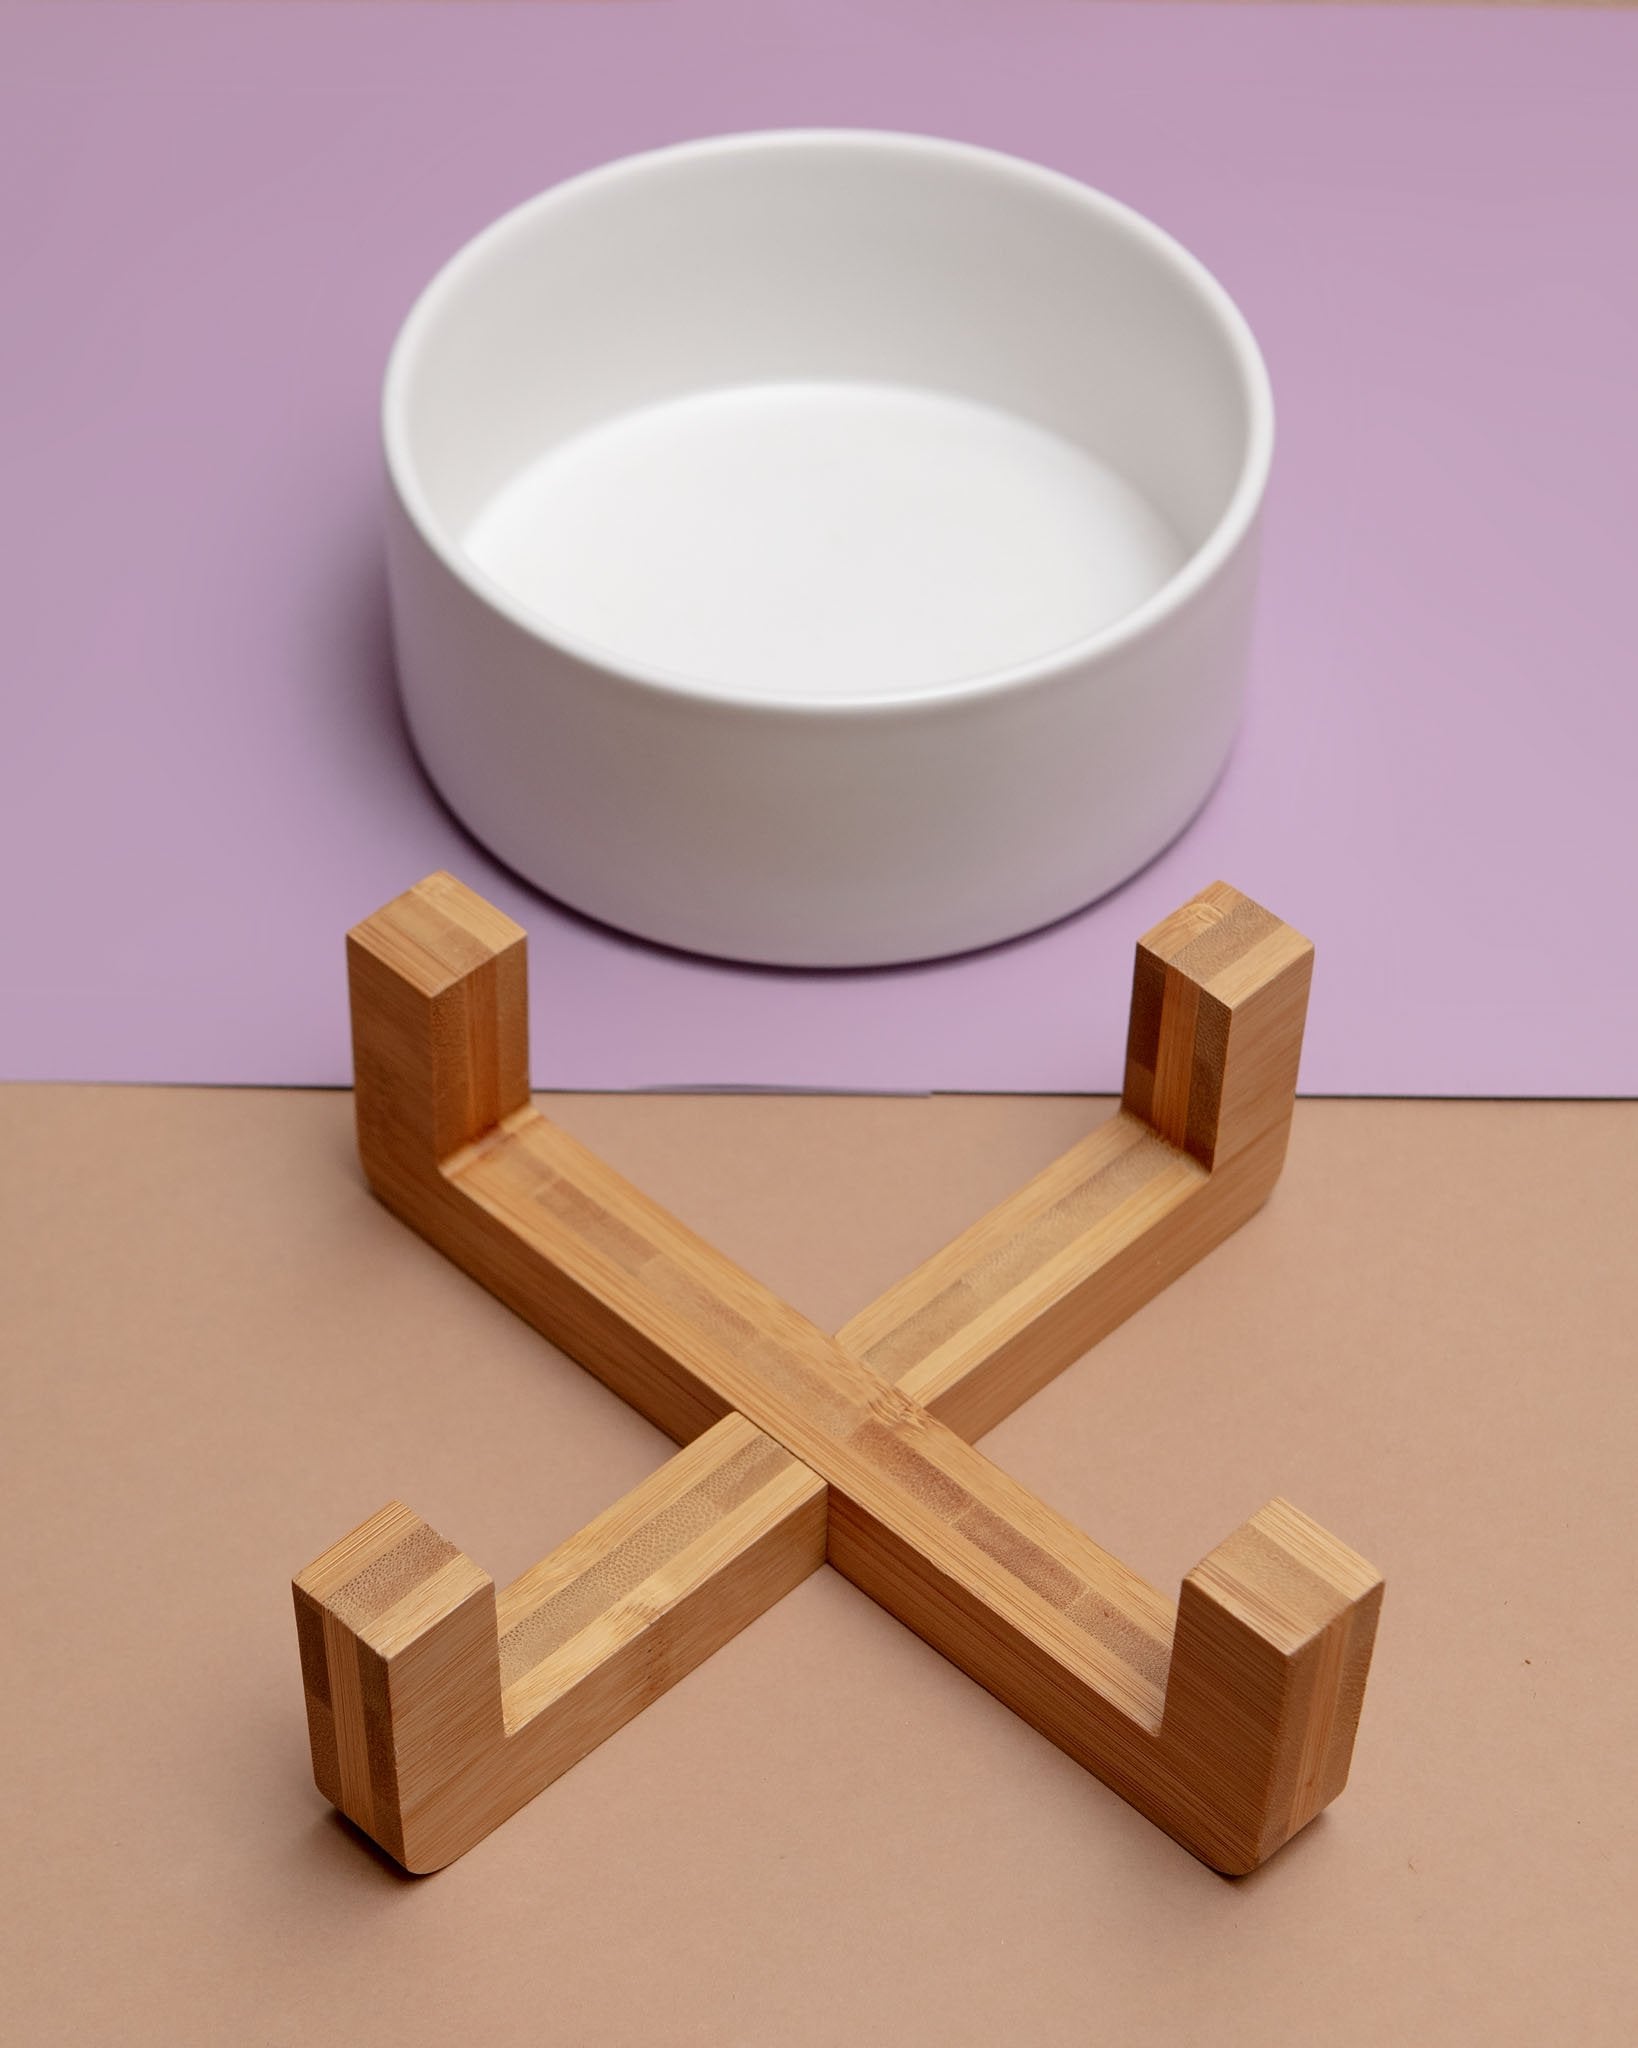 Bowl + Stand in Eggshell and Bamboo (Single)